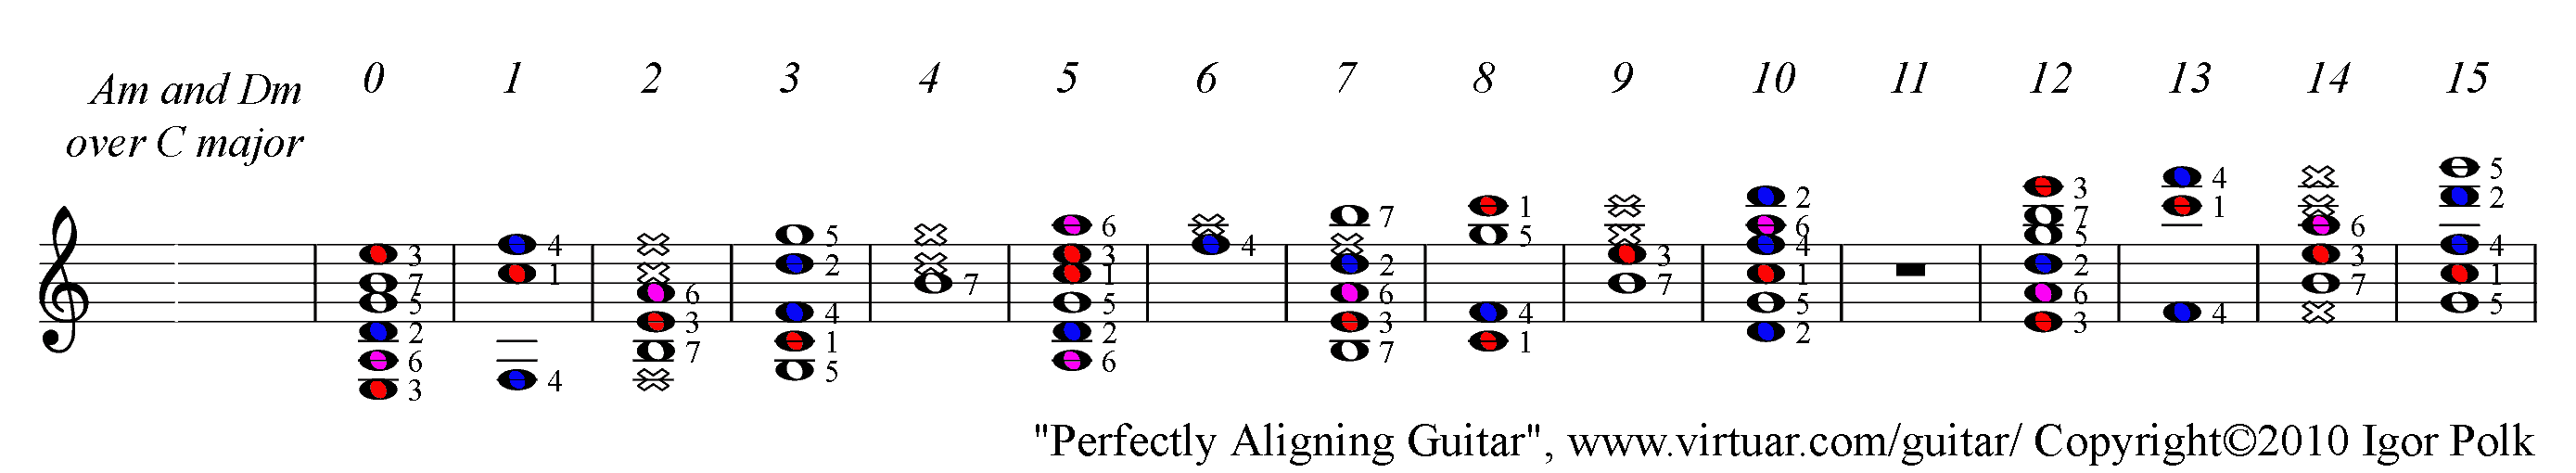 A minor and D minor chords over C major guitar scale